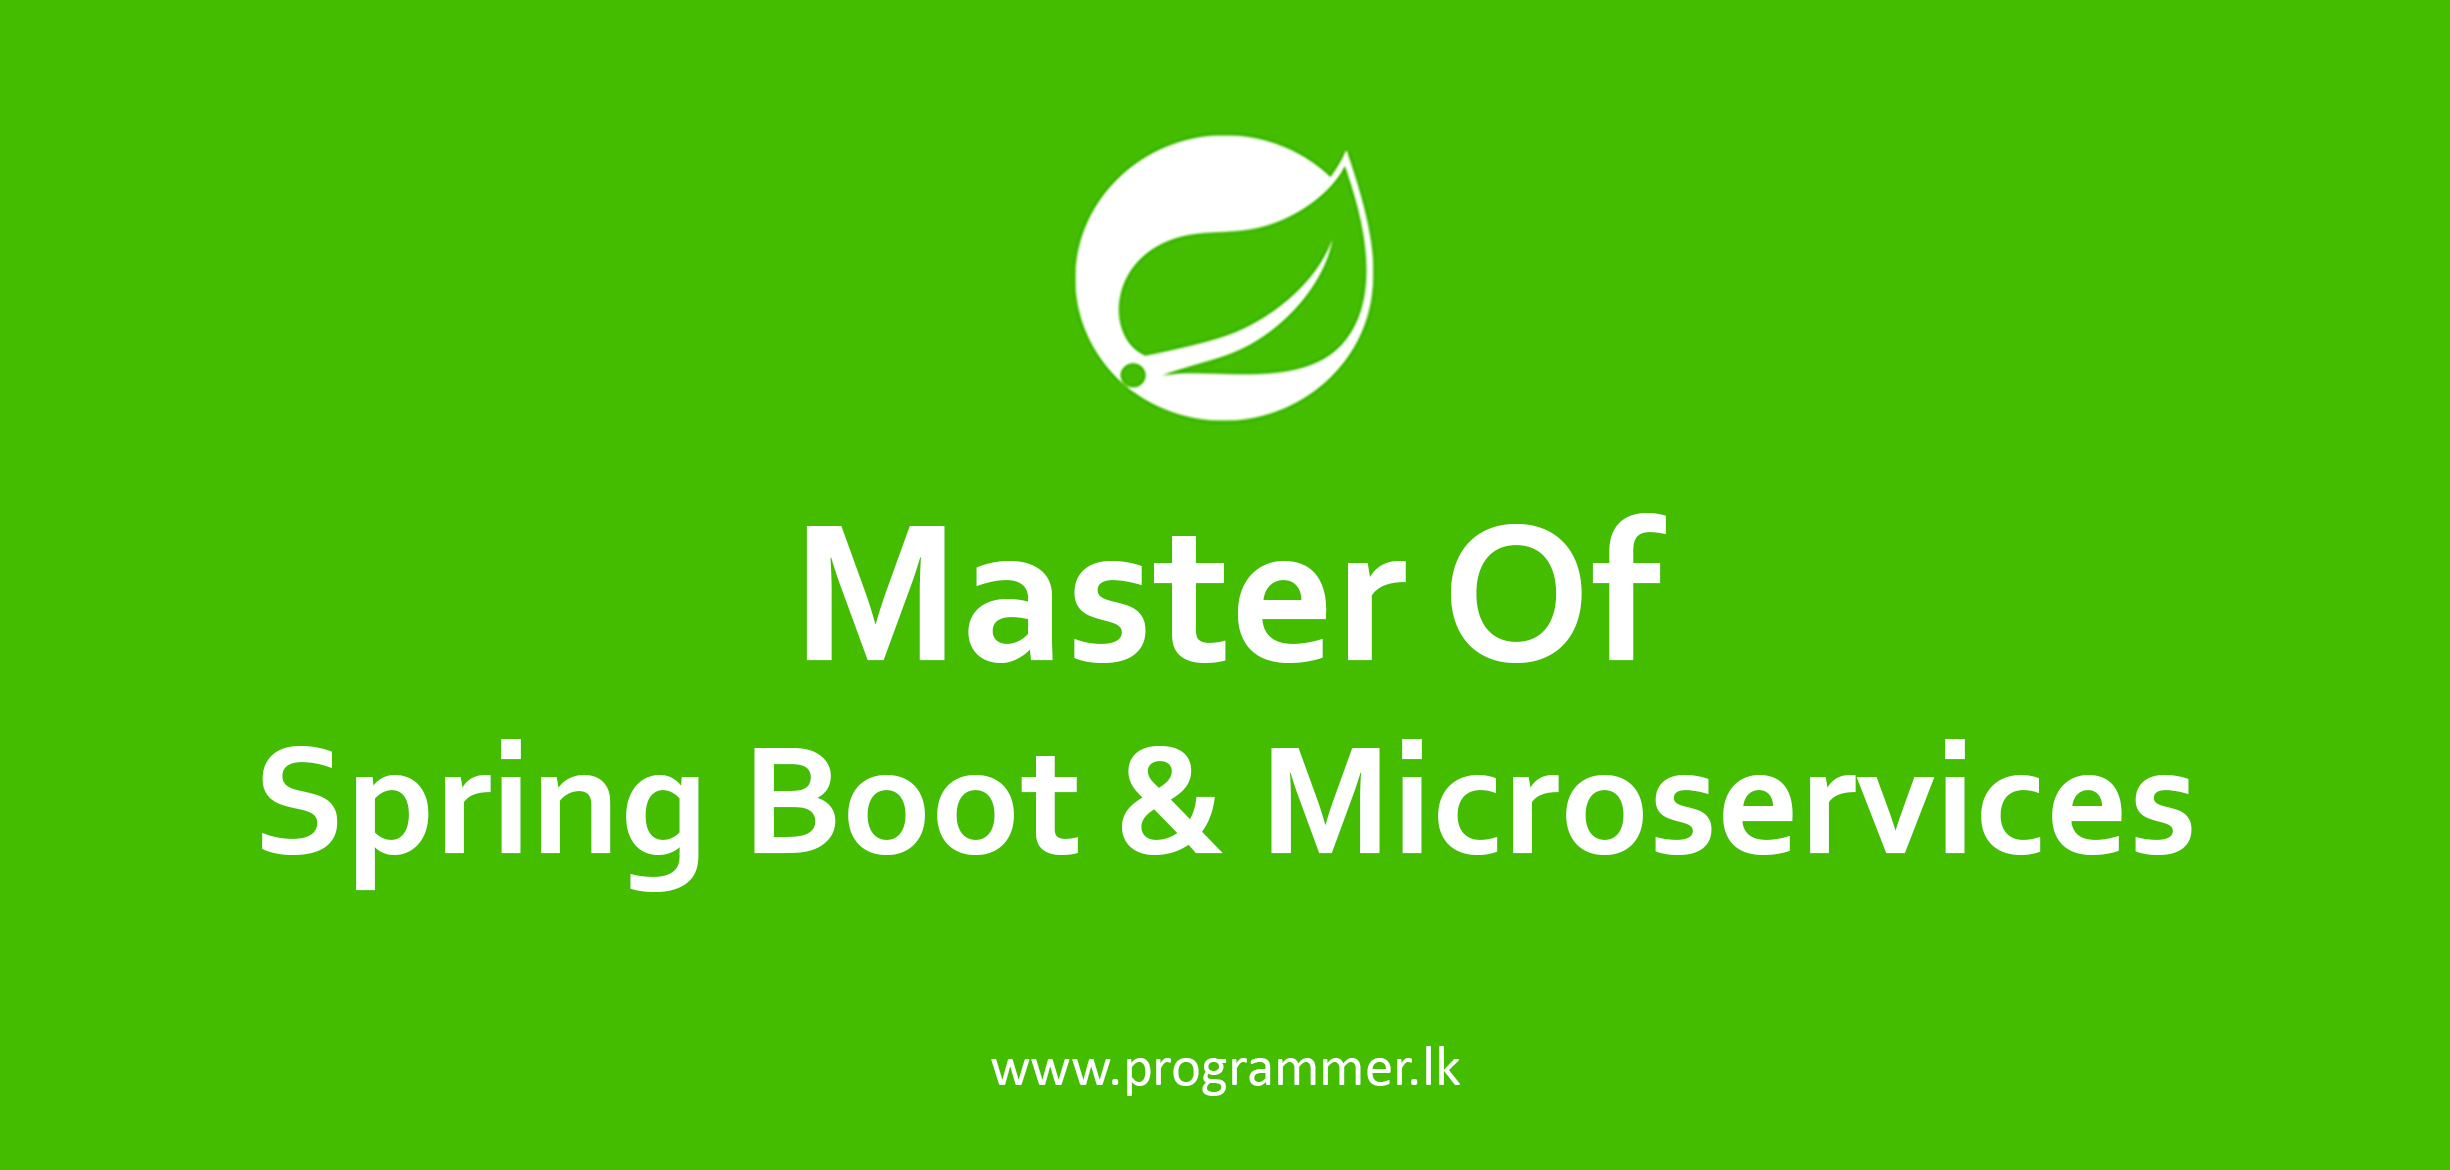 Master Of Spring Boot & Microservices | programmer.lk